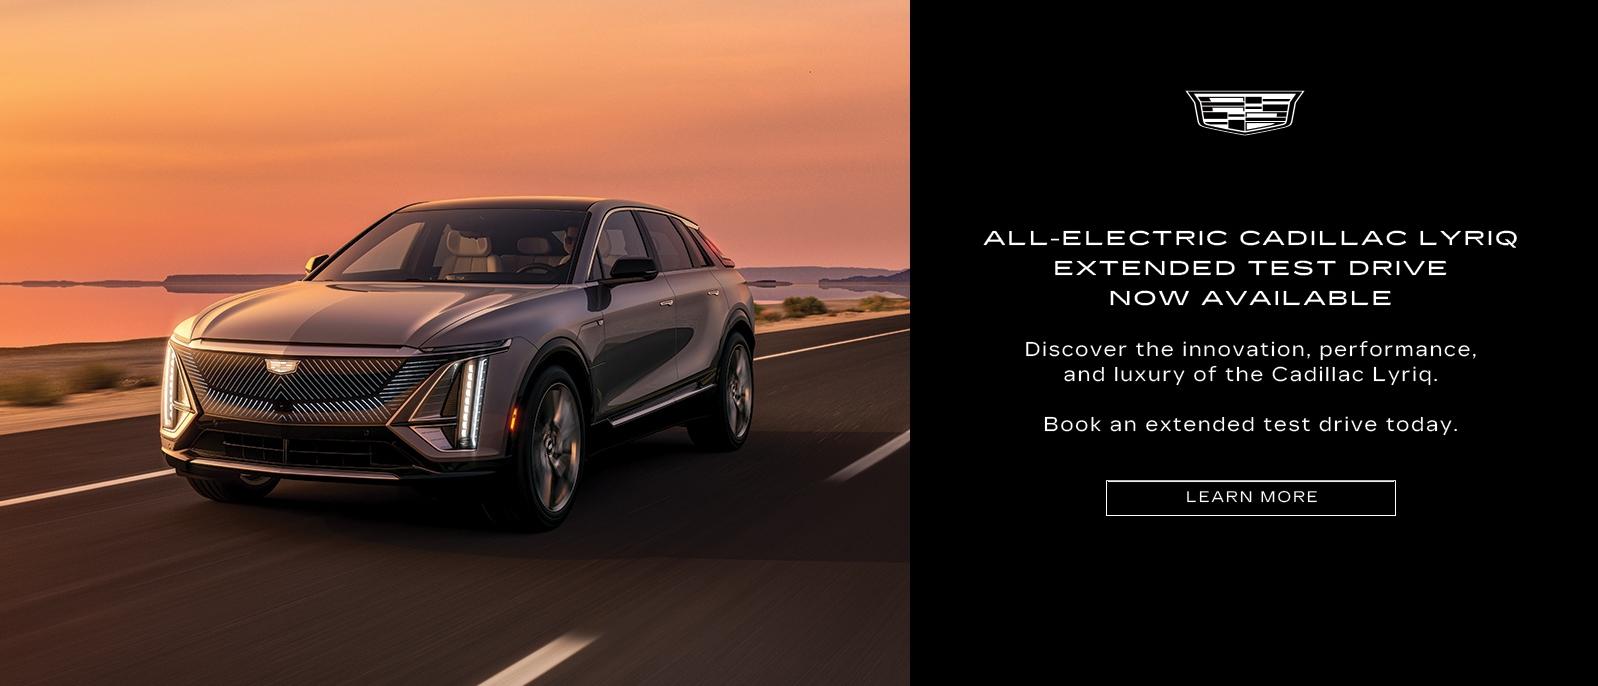 ALL-ELECTRIC CADILLAC LYRIQ | EXTENDED TEST DRIVE NOW AVAILABLE  |  LEARN MORE 